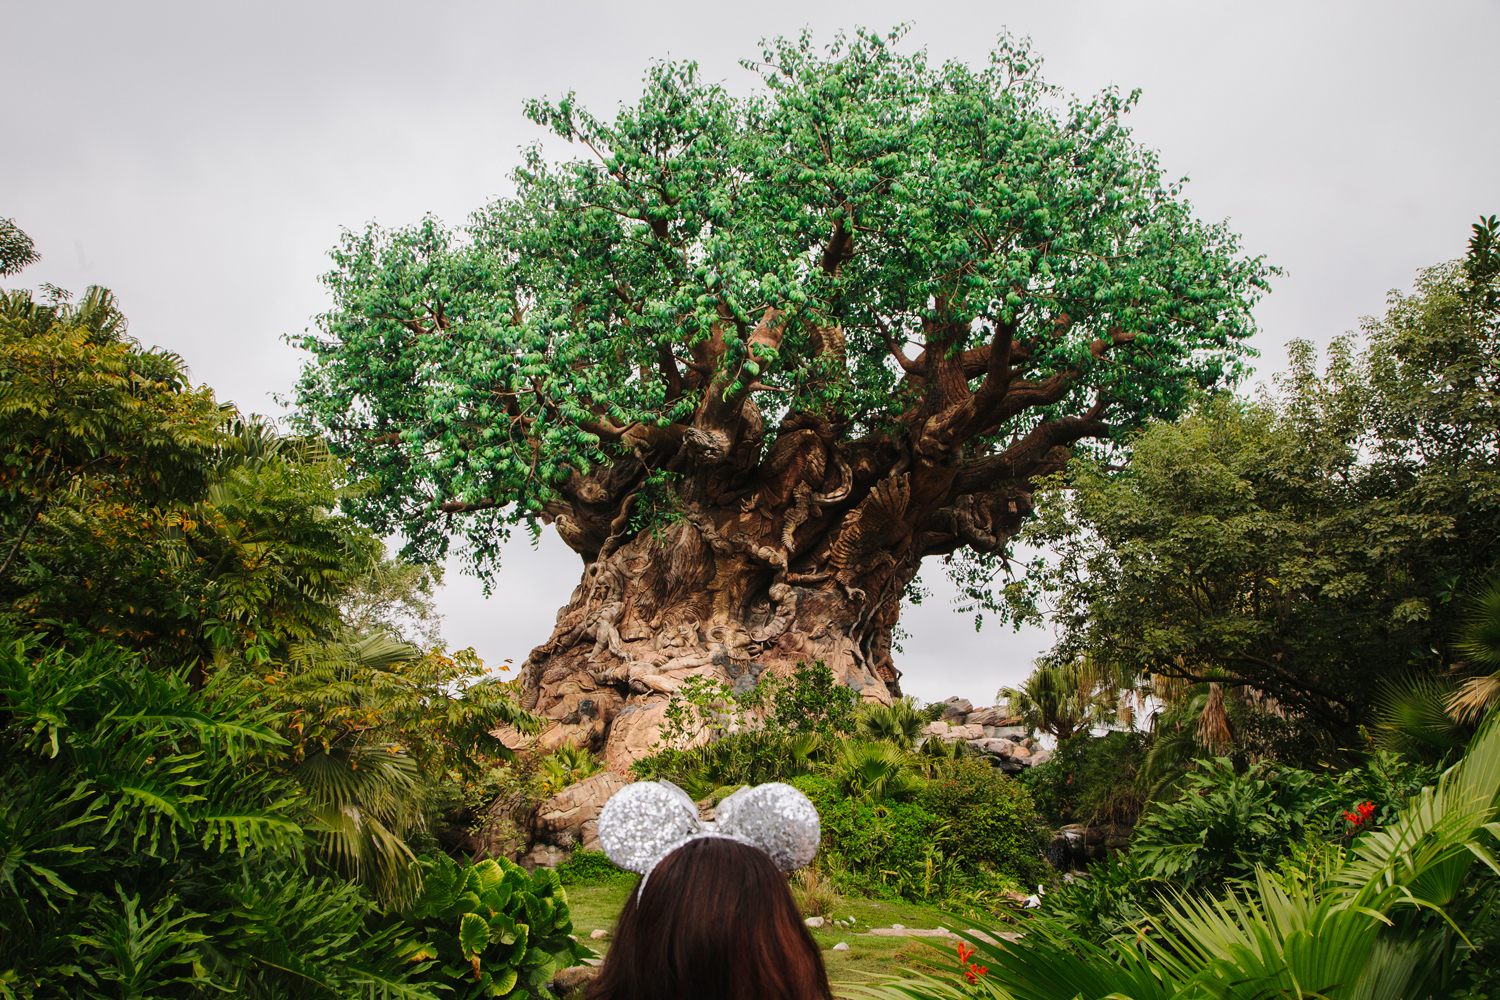 Tree of Life, Orlando, FL, 2012, from the project, 'Florida: Eden Isle'.